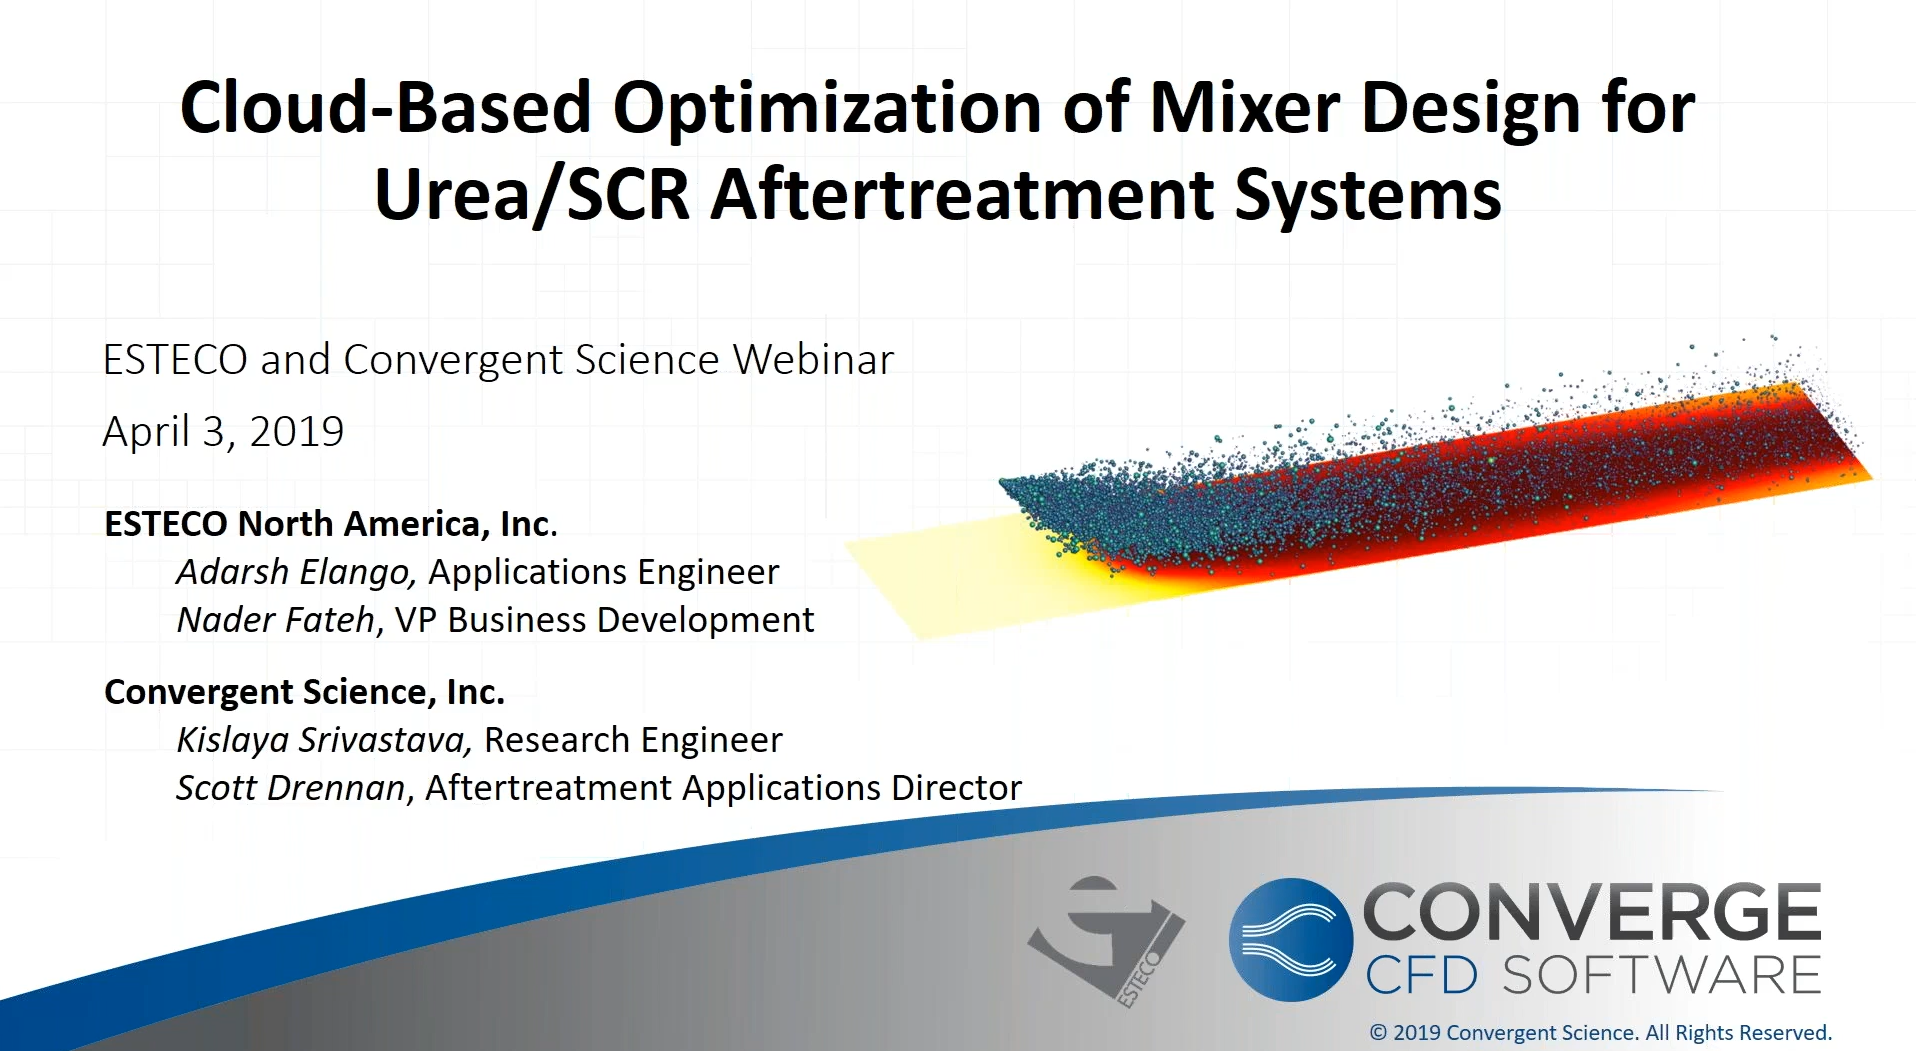 Cloud-based optimization of Mixer Design for Urea/SCR Aftertreatment Systems